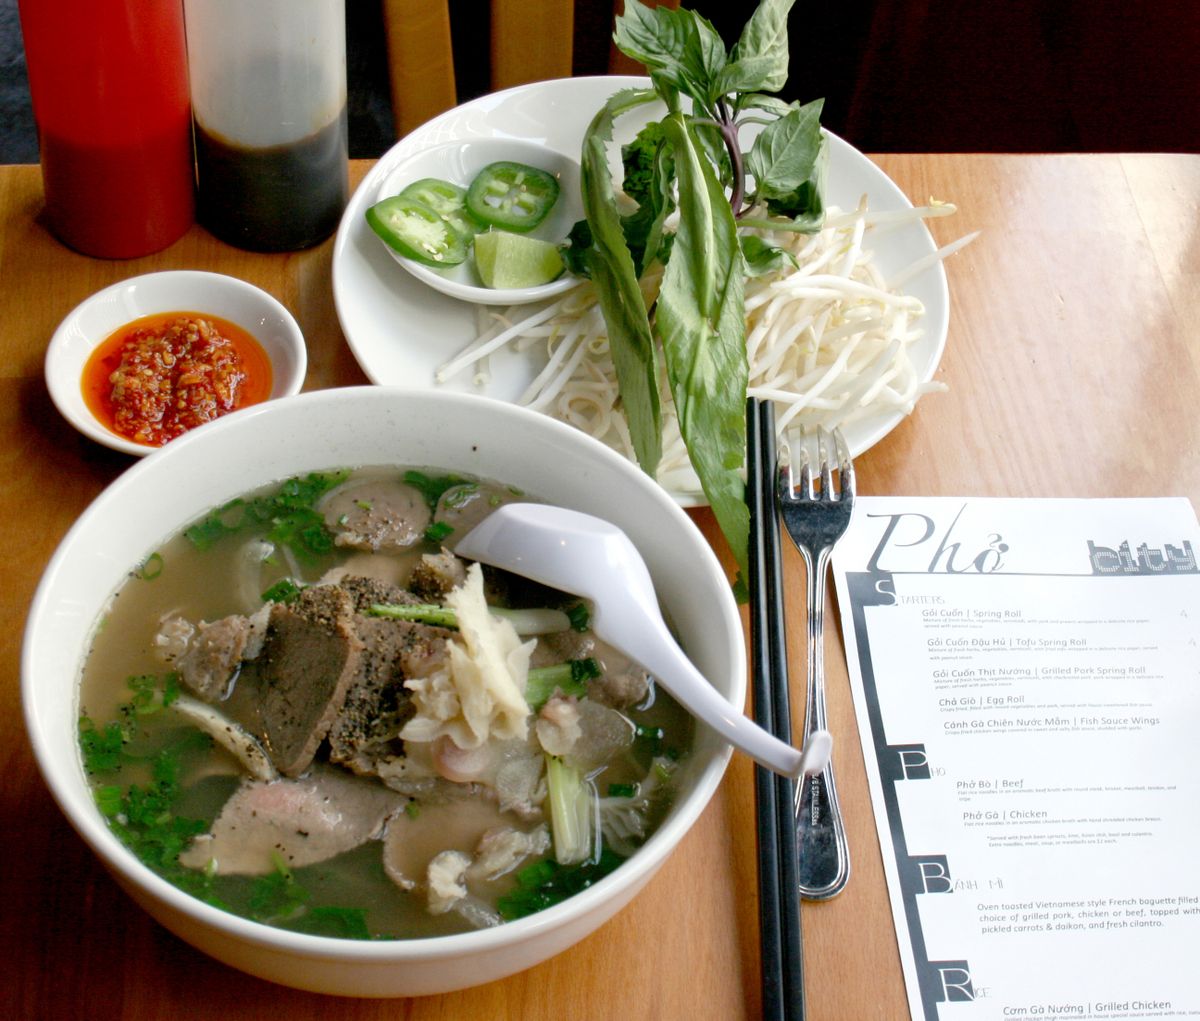 At Pho City, you’ll find a steaming bowl of noodles swimming in broth with a plate filled with bean sprouts, sprigs of culantro (a relative of cilantro) and Thai basil, a few slices of fresh jalapeno pepper and a wedge of lime, as well as a small dish of house-made red chili paste.